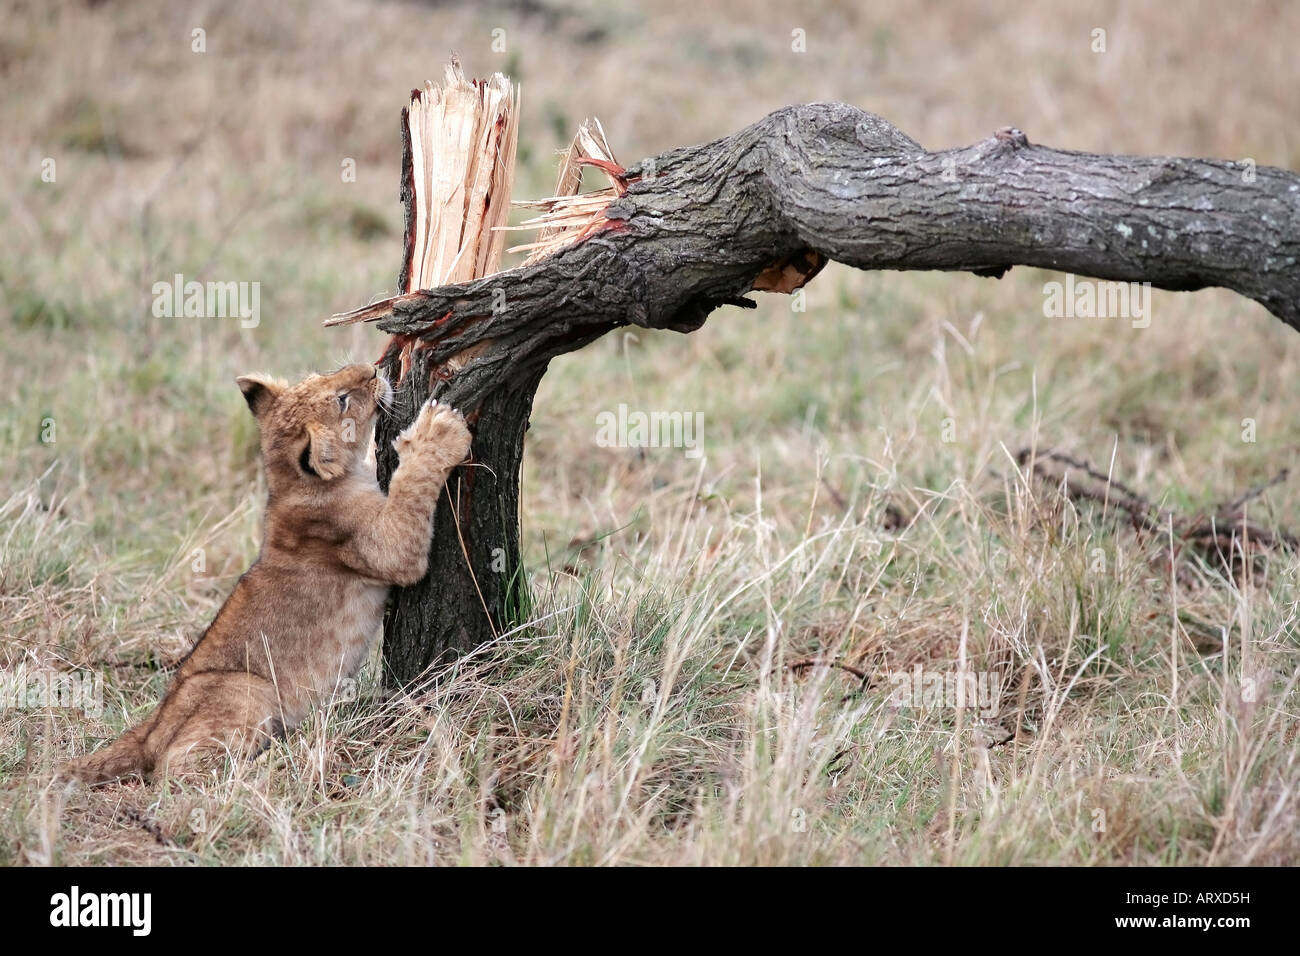 Lion cub playing with broken tree in the Masai Mara reserve in Kenya Africa Stock Photo